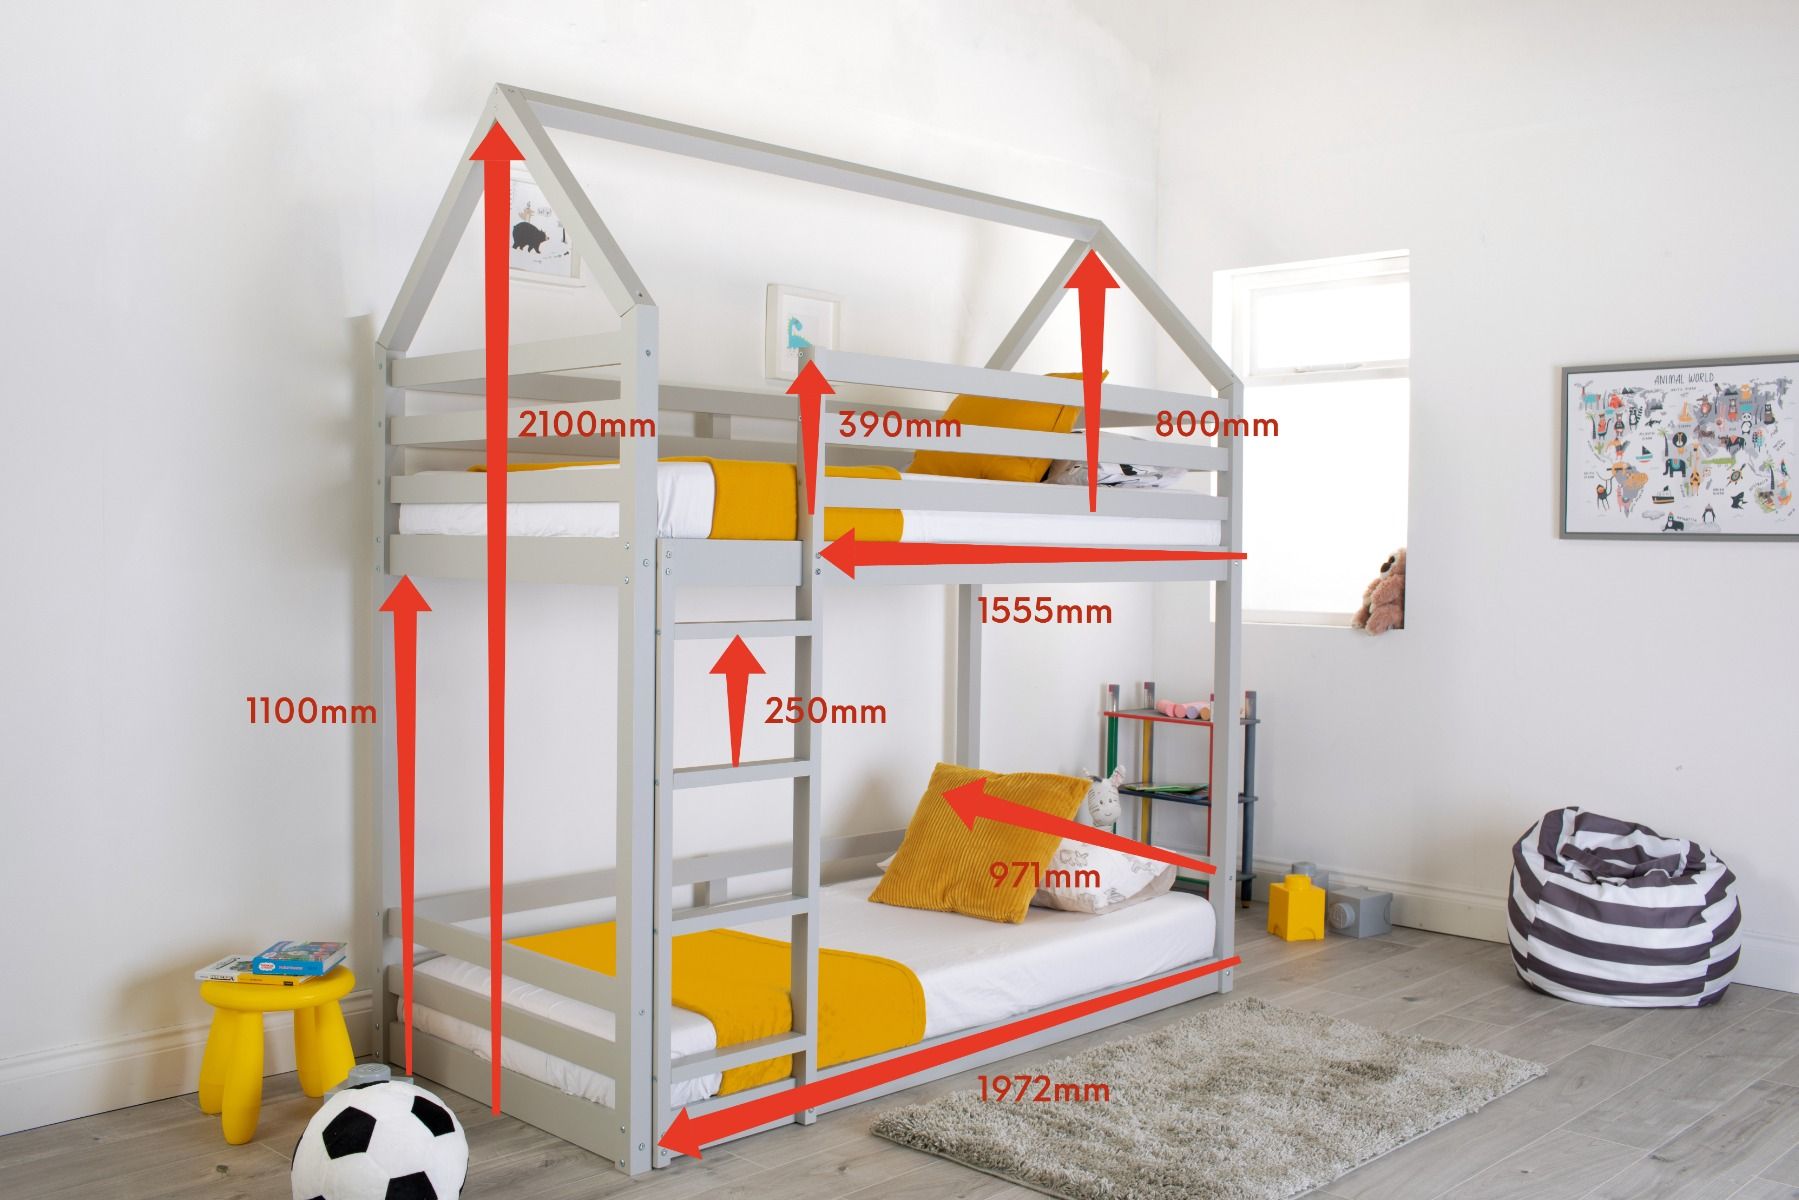 Flair Playhouse Bunk Bed, Bunk Bed Dimensions